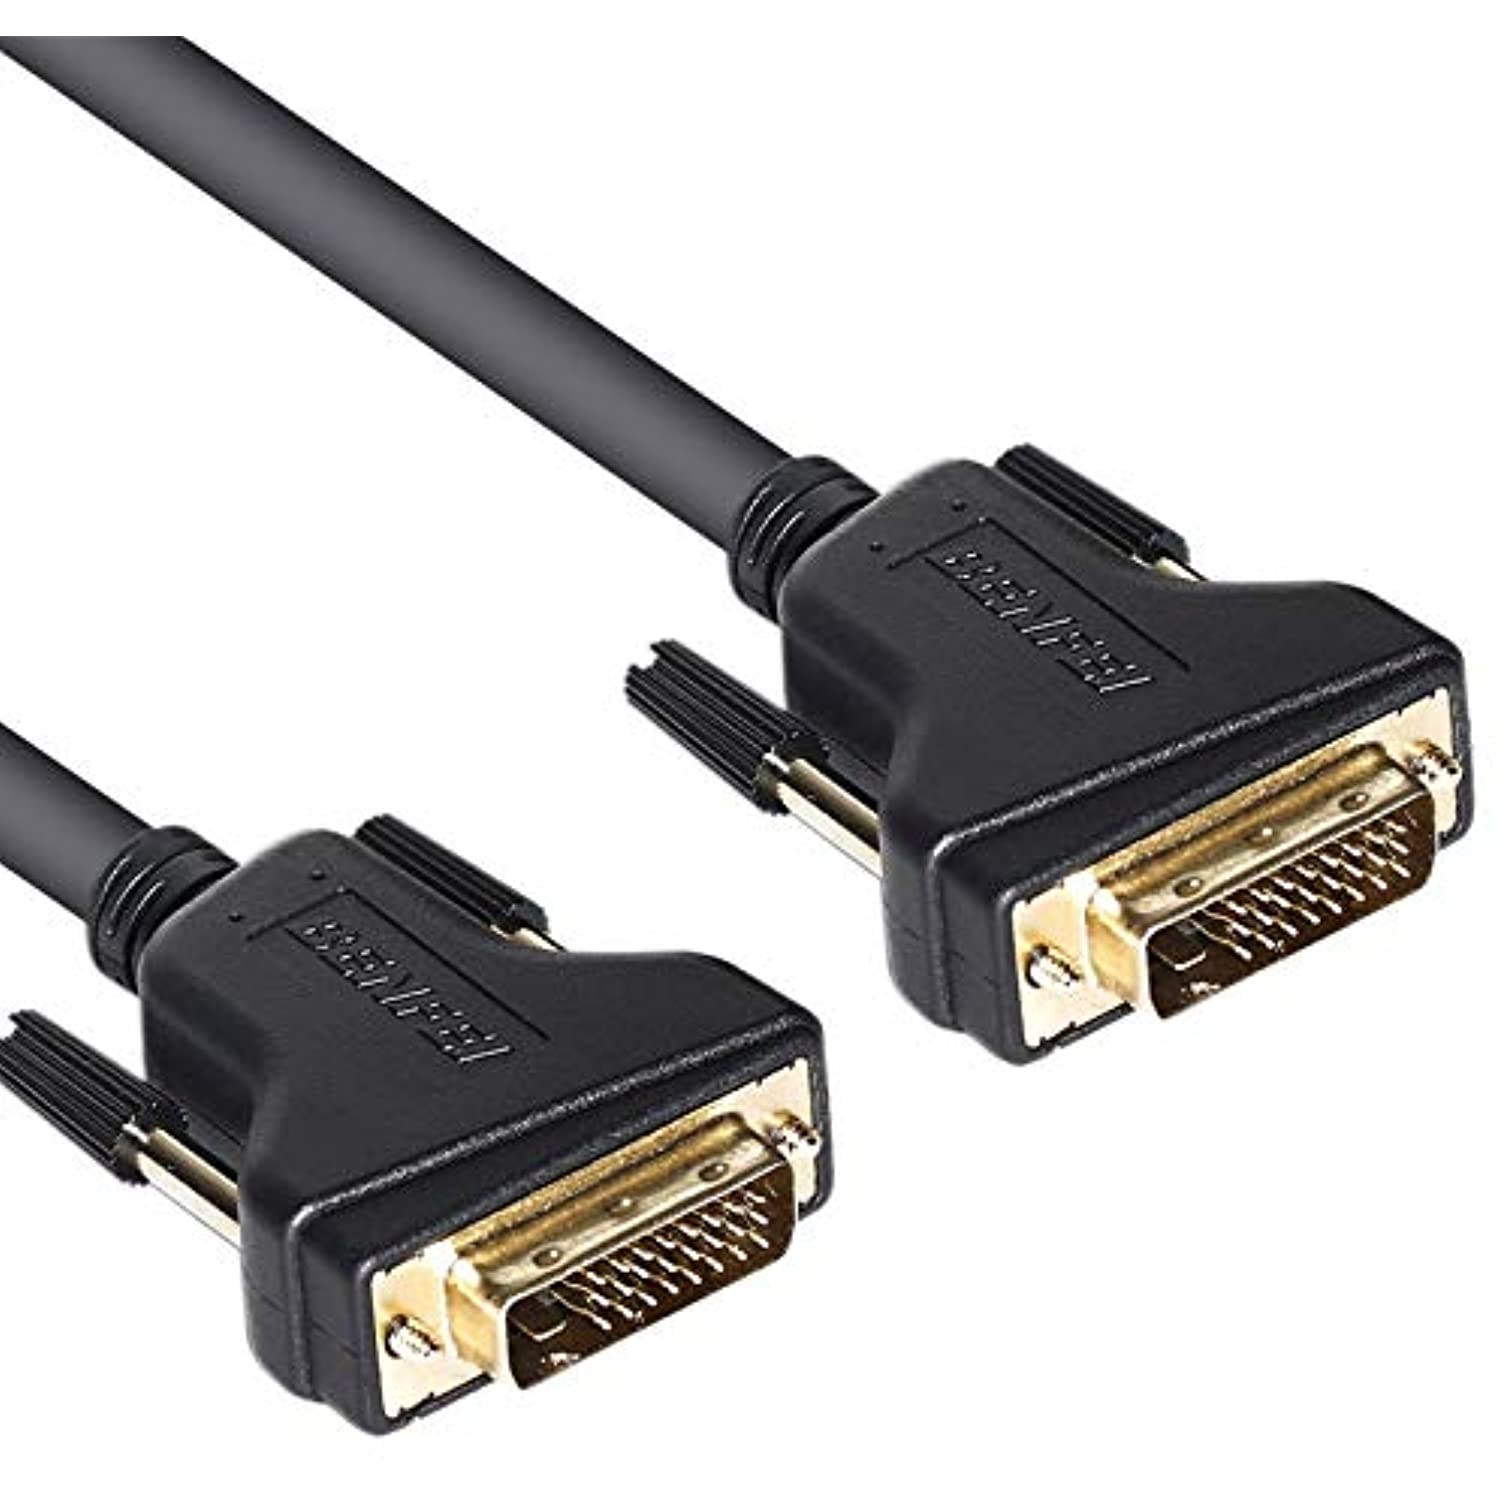 DVI to DVI Cable, Benfei DVI-D to DVI-D Dual Link 6 Feet Cable